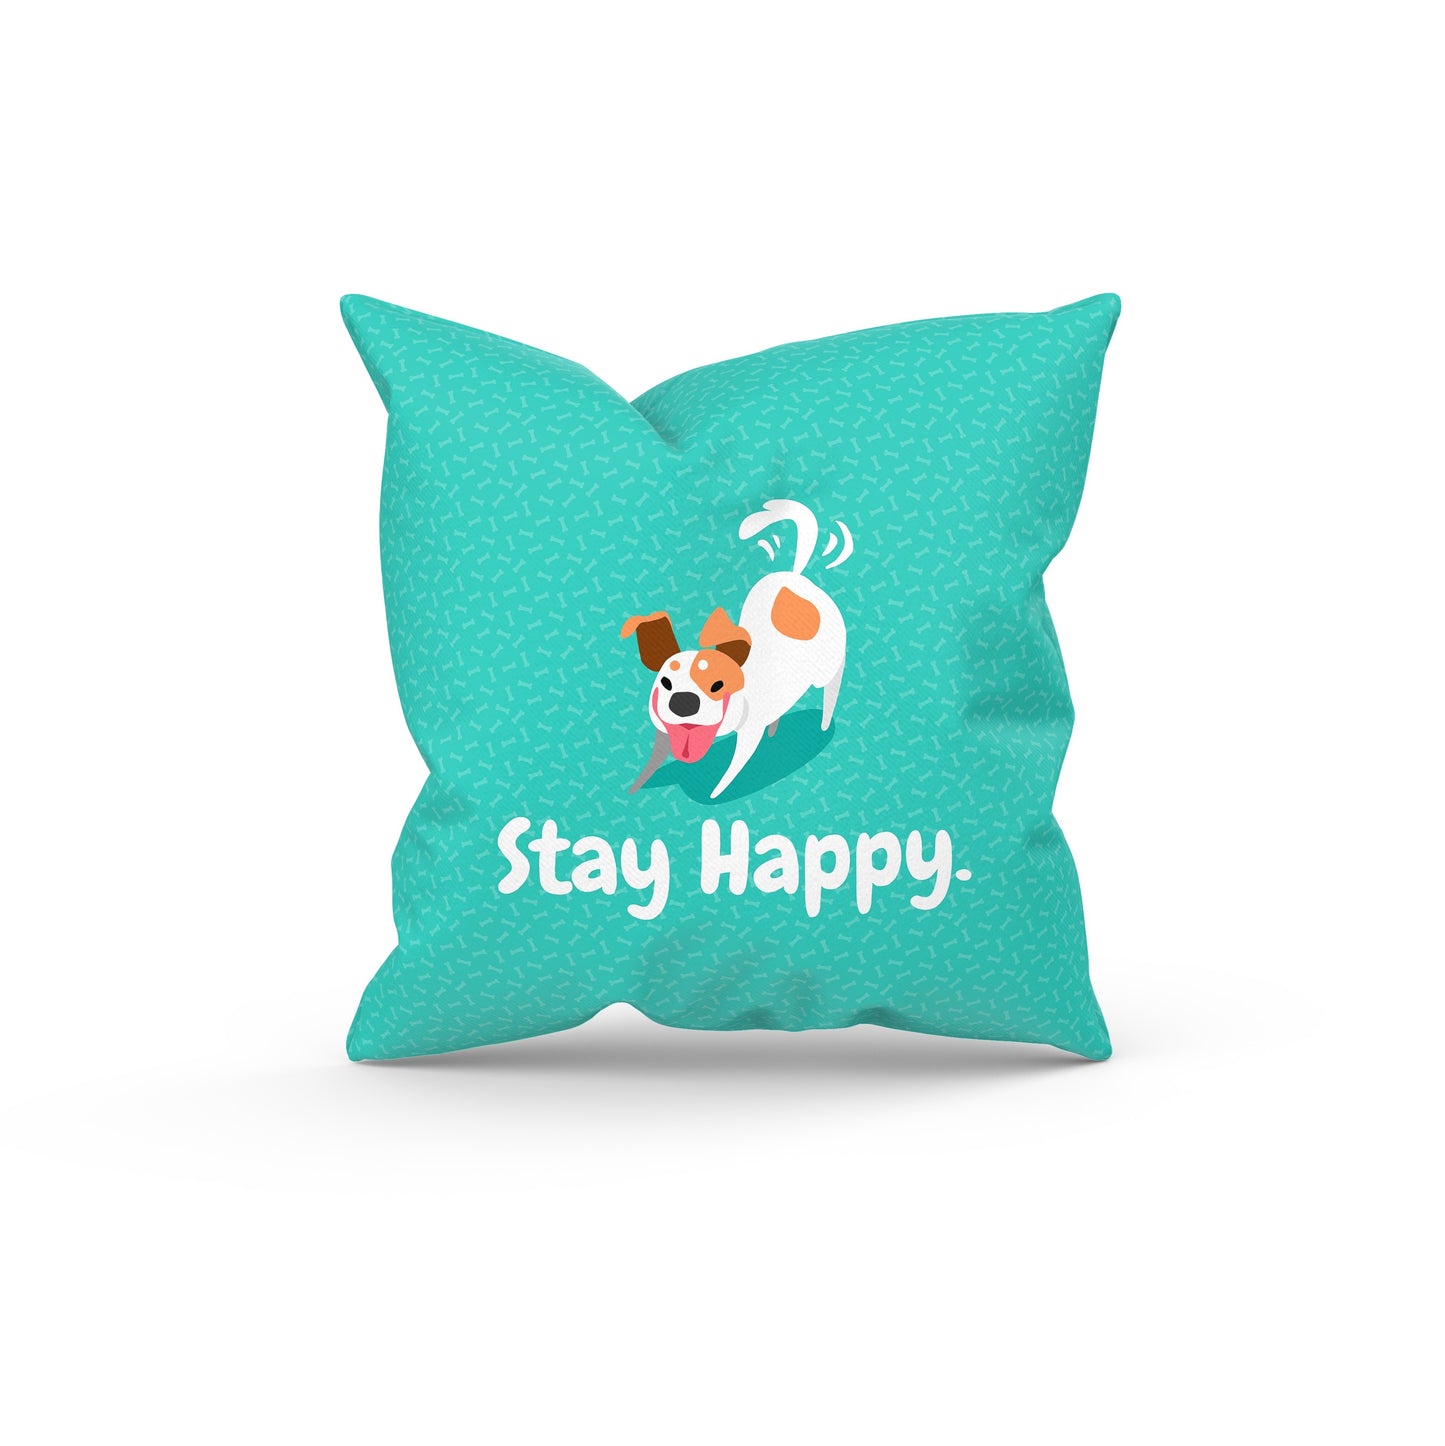 Stay Happy Cushion Cover (Cover & Cushion Both Included)